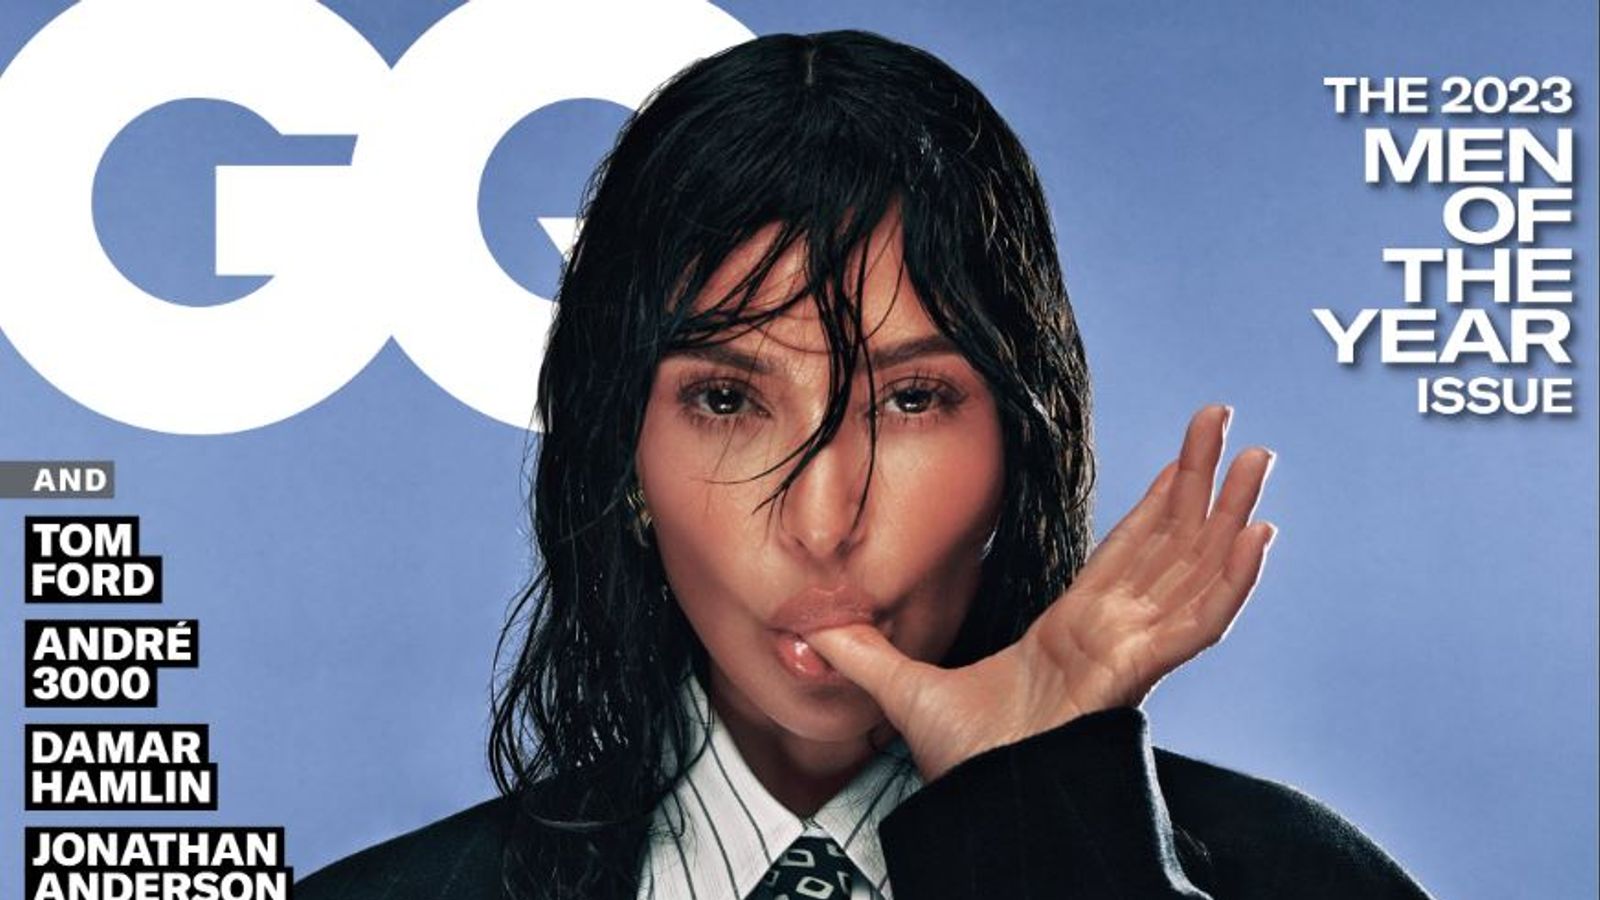 Kim Kardashian named one of GQ's 'Men Of The Year' for 2023 Ents